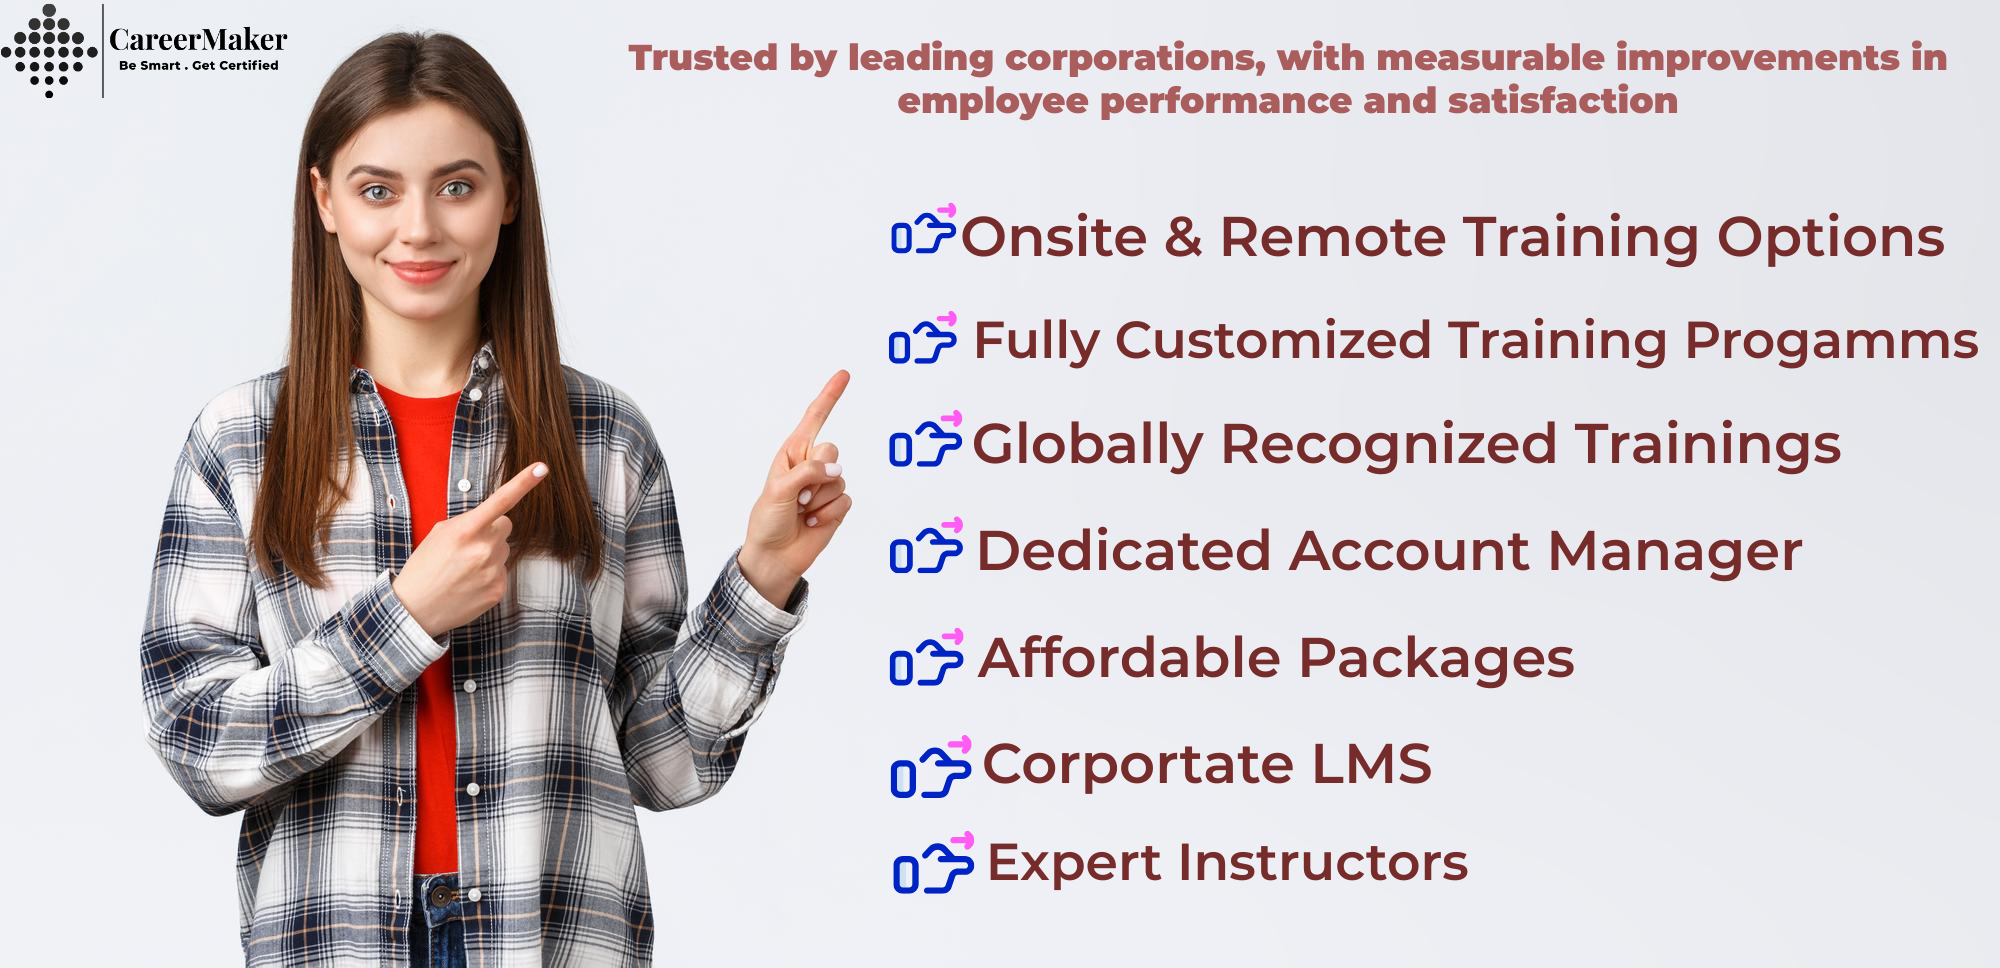 CareerMaker Solutions For Corporates